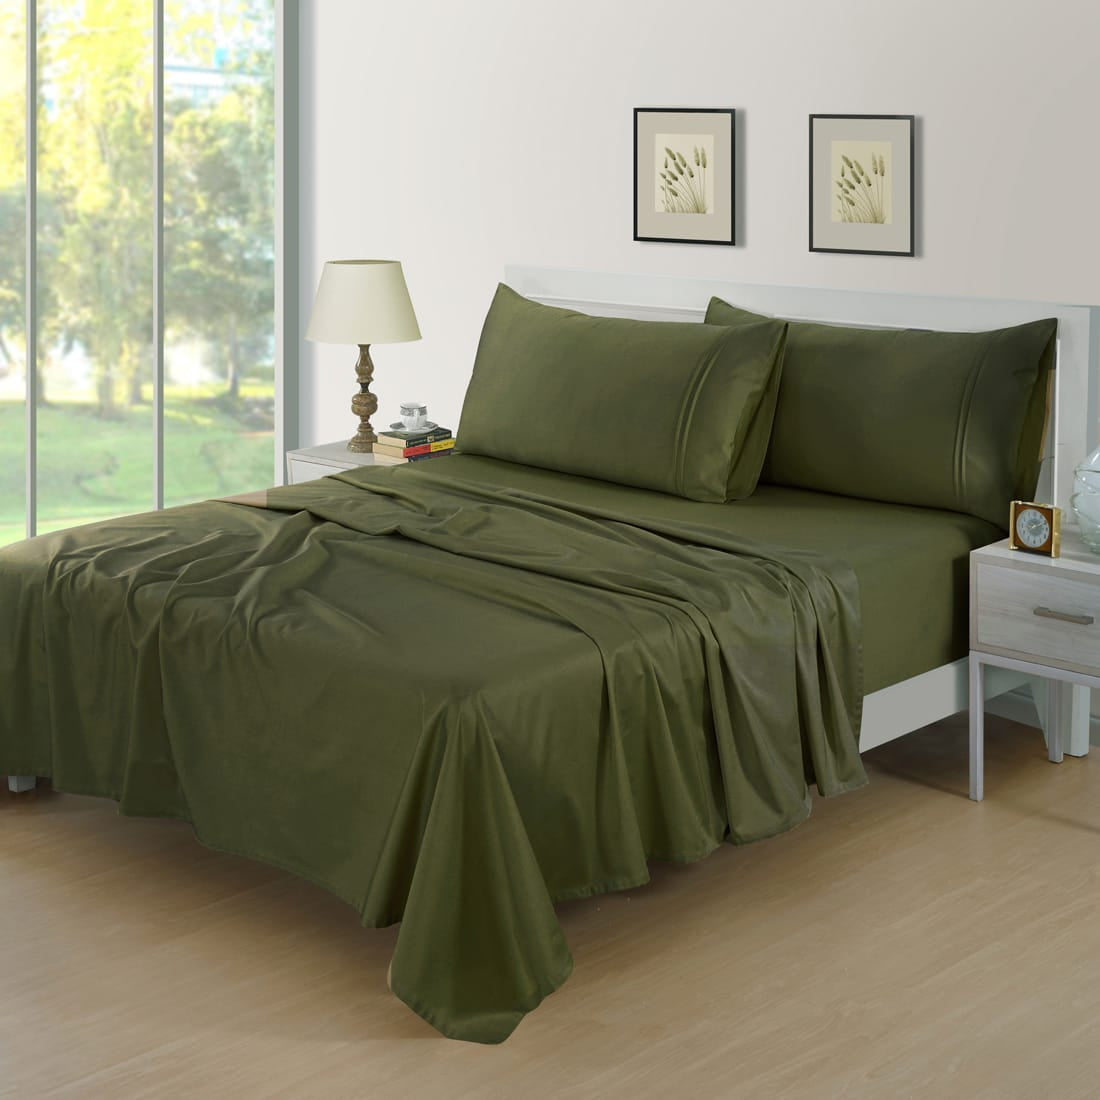 Soft Cotton Plain 400 TC King Size Satin Flat Bedsheet In Bottle Green At Best Prices 